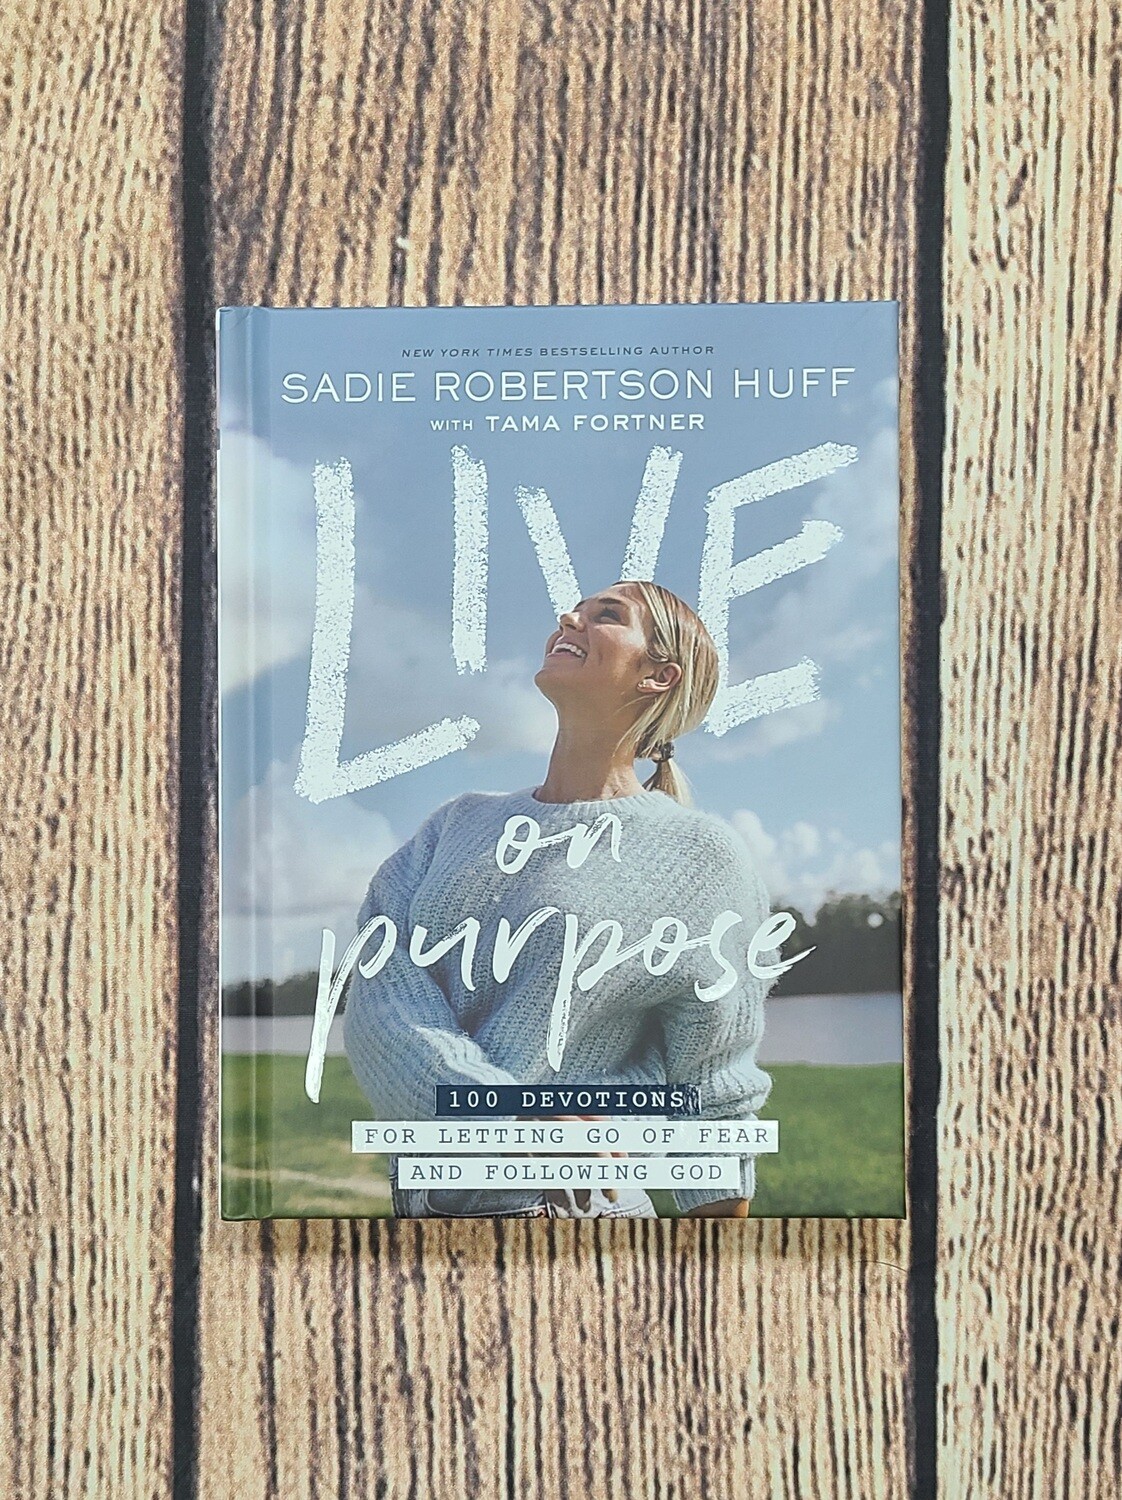 Live on Purpose: 100 Devotions for Letting Go of Fear and Following God by Sadie Robertson Huff with Tama Fortner